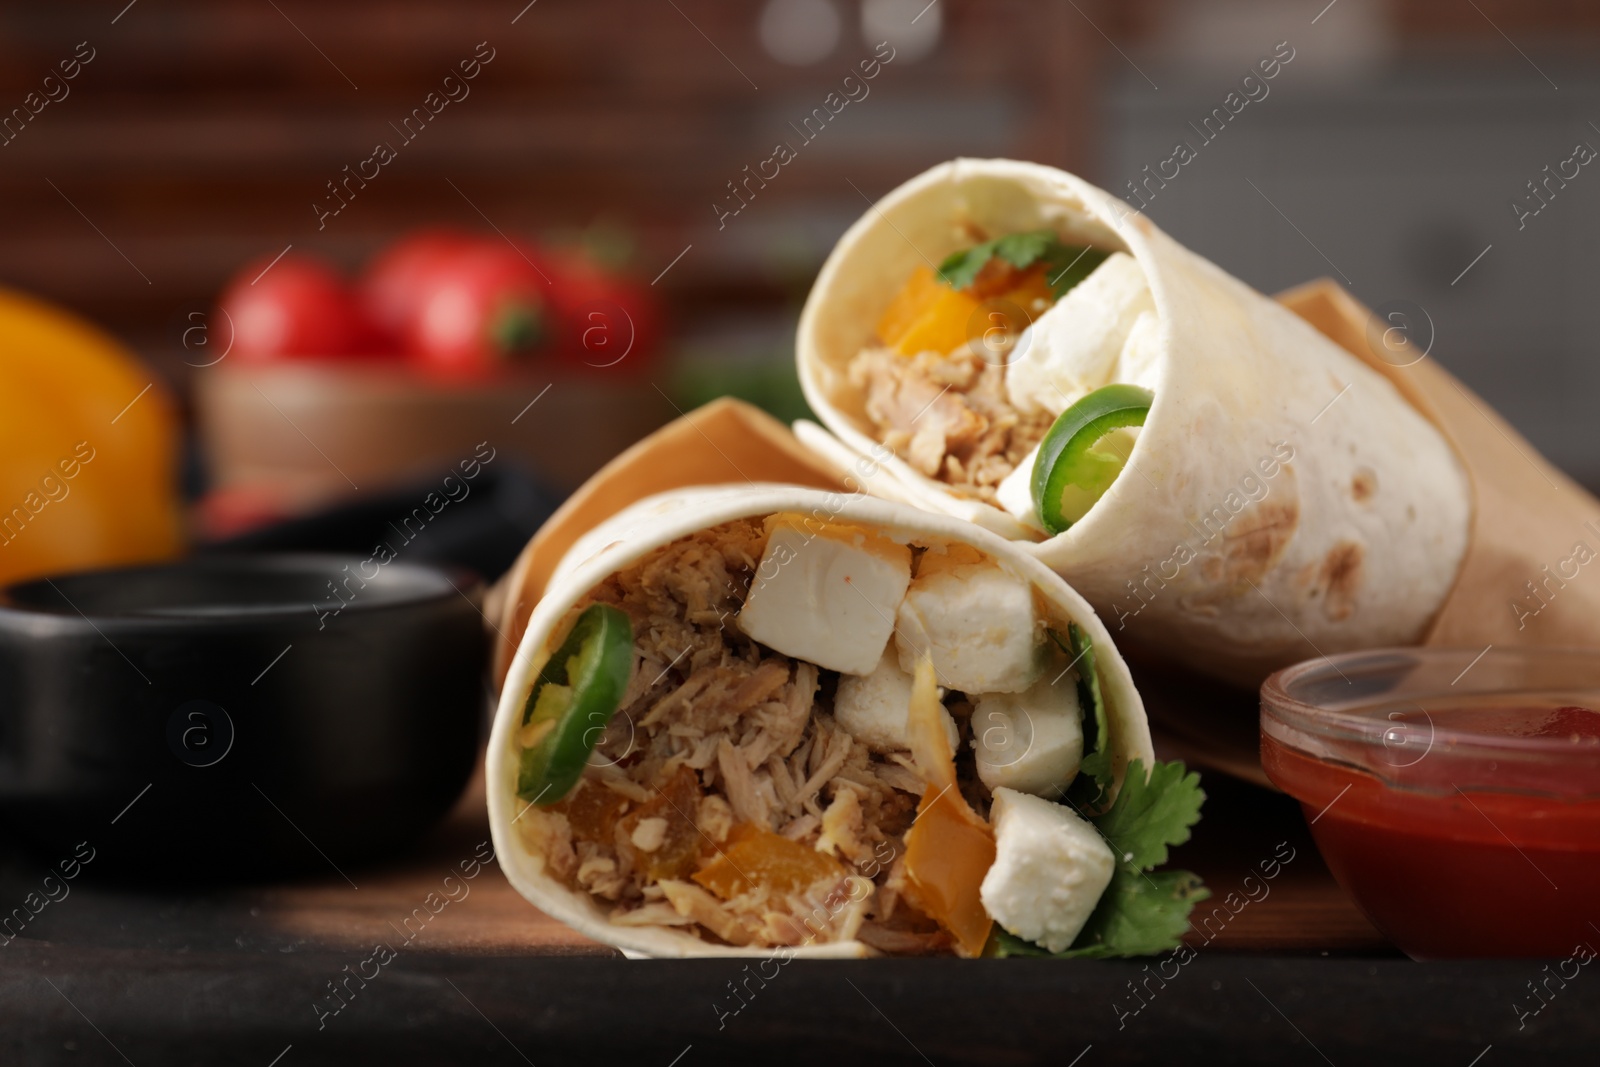 Photo of Delicious tortilla wraps with tuna, cheese, vegetables and sauce on table, closeup